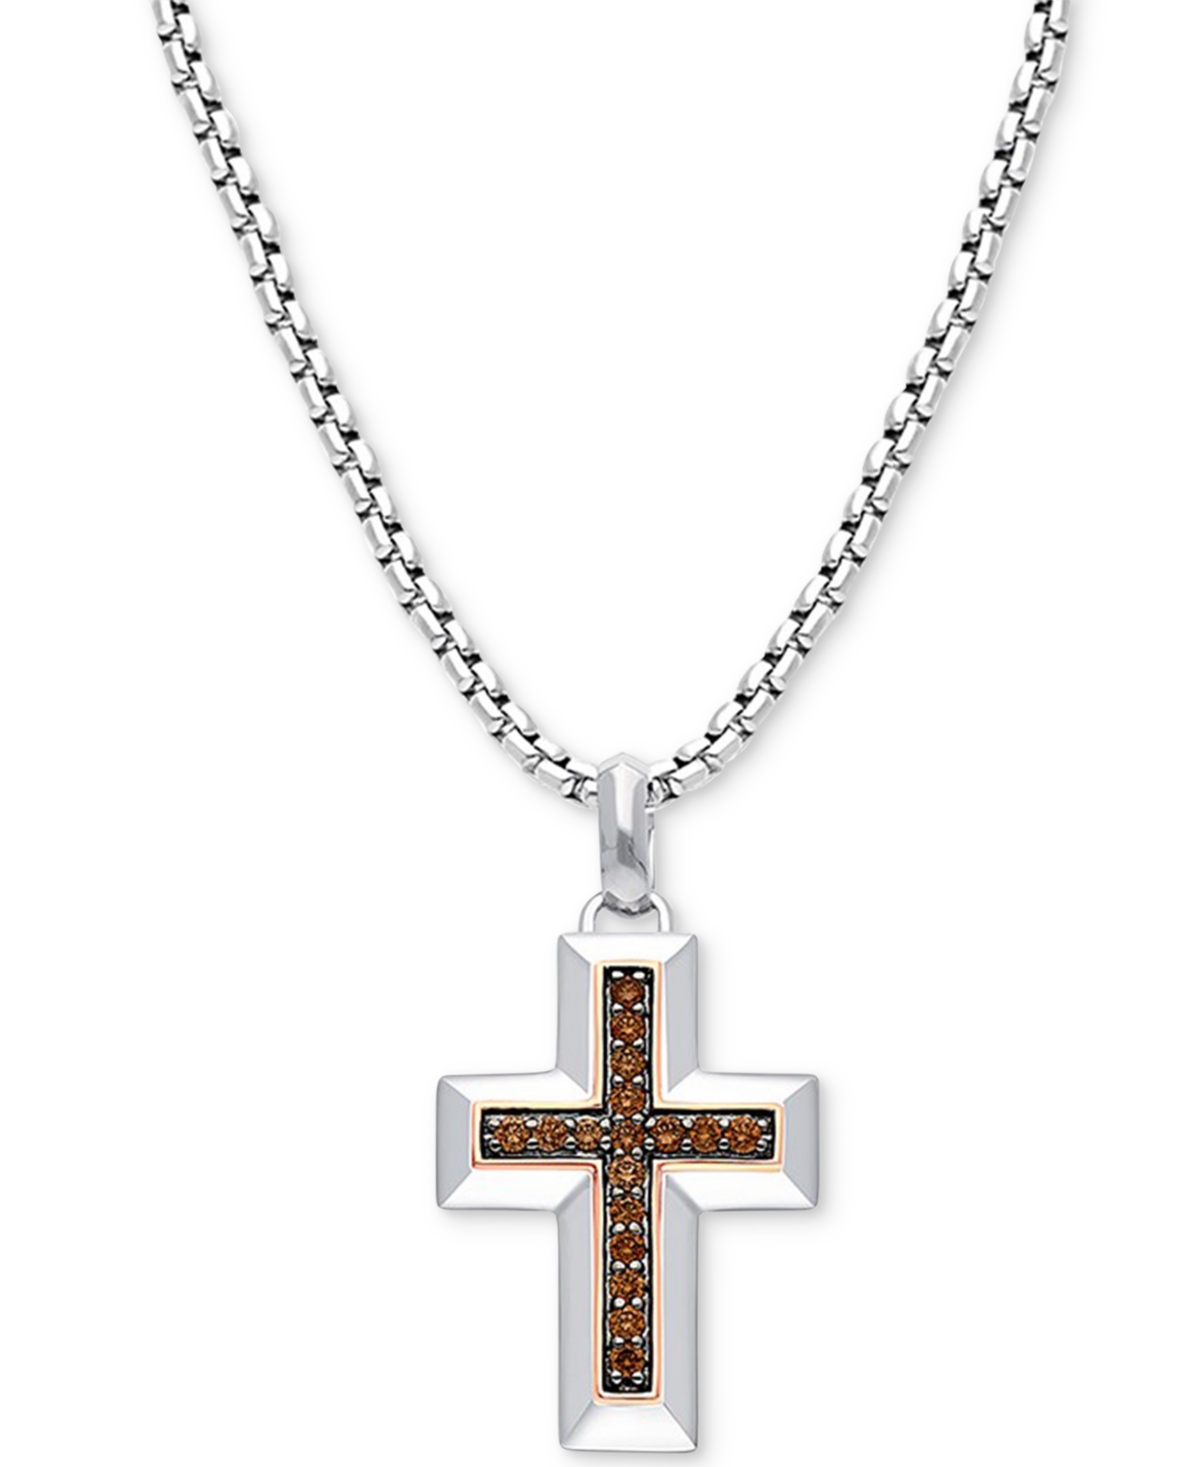 Chocolatier Men's Chocolate Diamond Cross 22" Pendant Necklace (1/3 ct. t.w.) in Sterling Silver & 14k Rose Gold-Plate - Silver